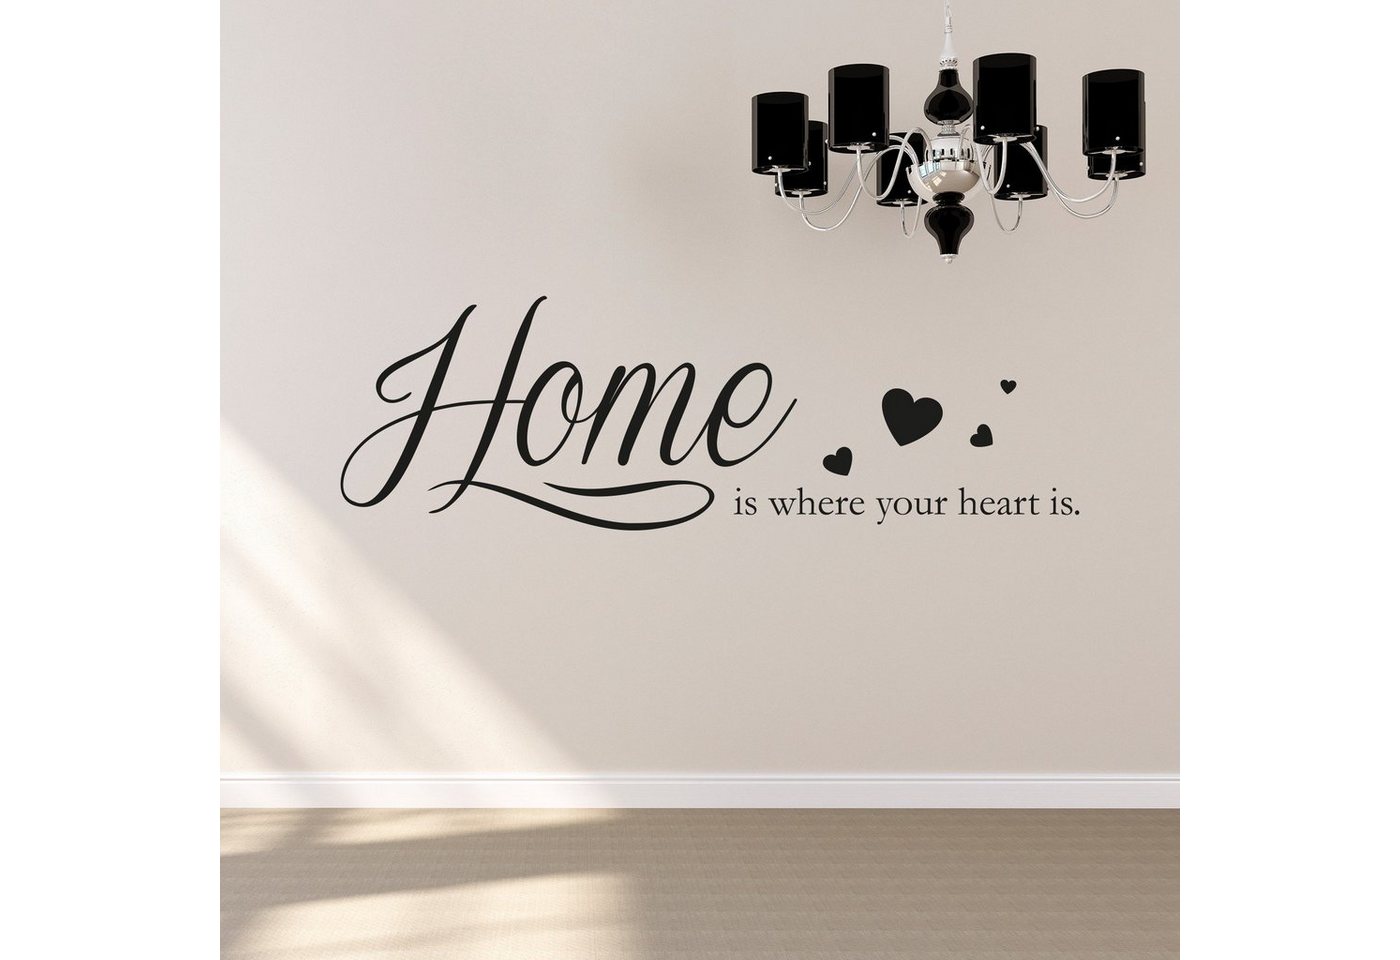 queence Wandtattoo Home is where your heart is, 120 x 30 cm von queence